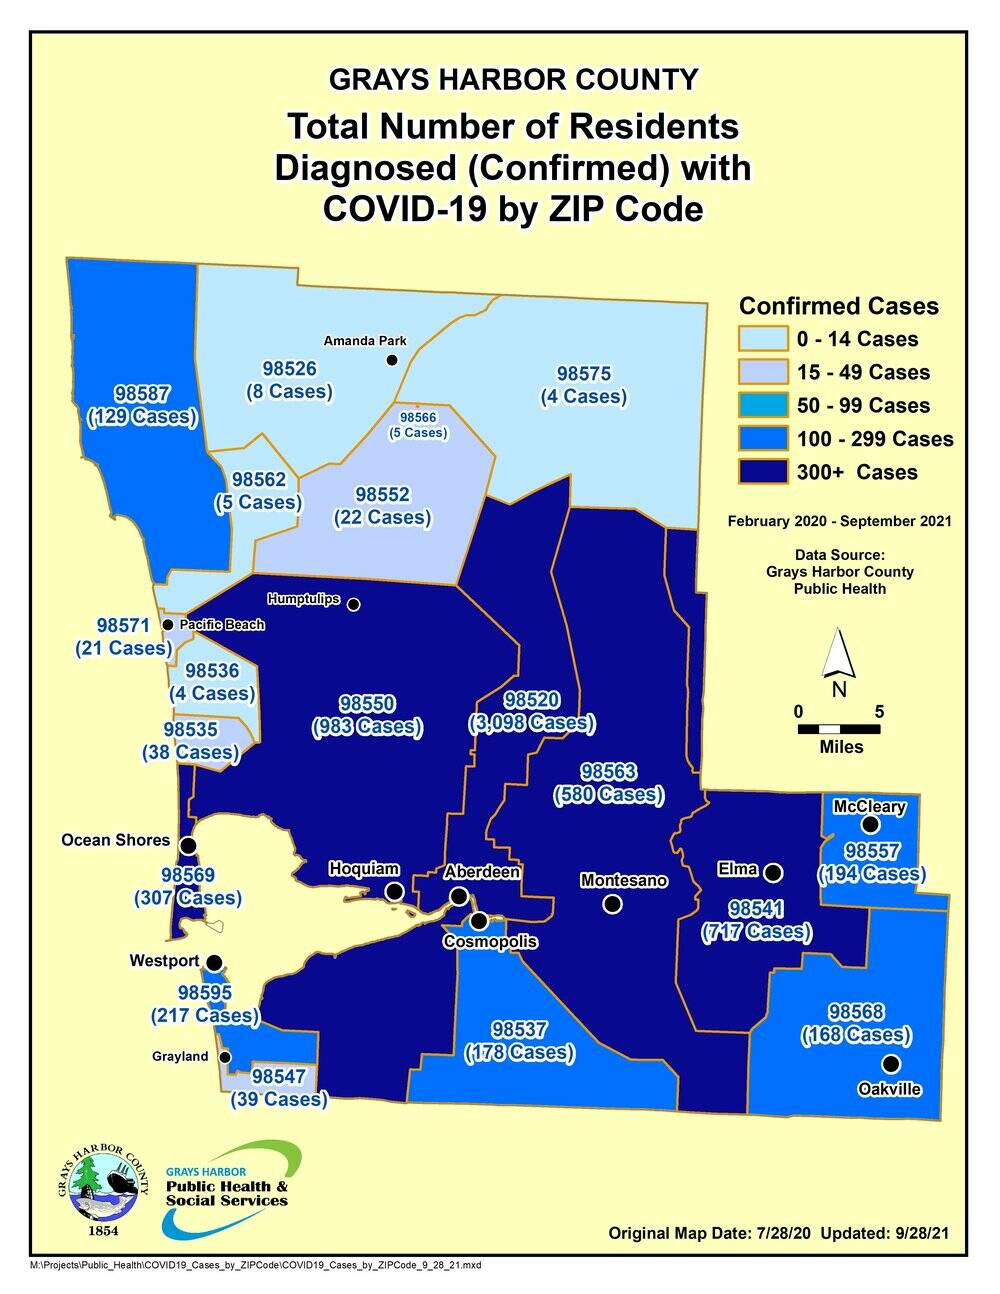 Courtesy of Grays Harbor County Public Health 
Pandemic case totals by ZIP code.